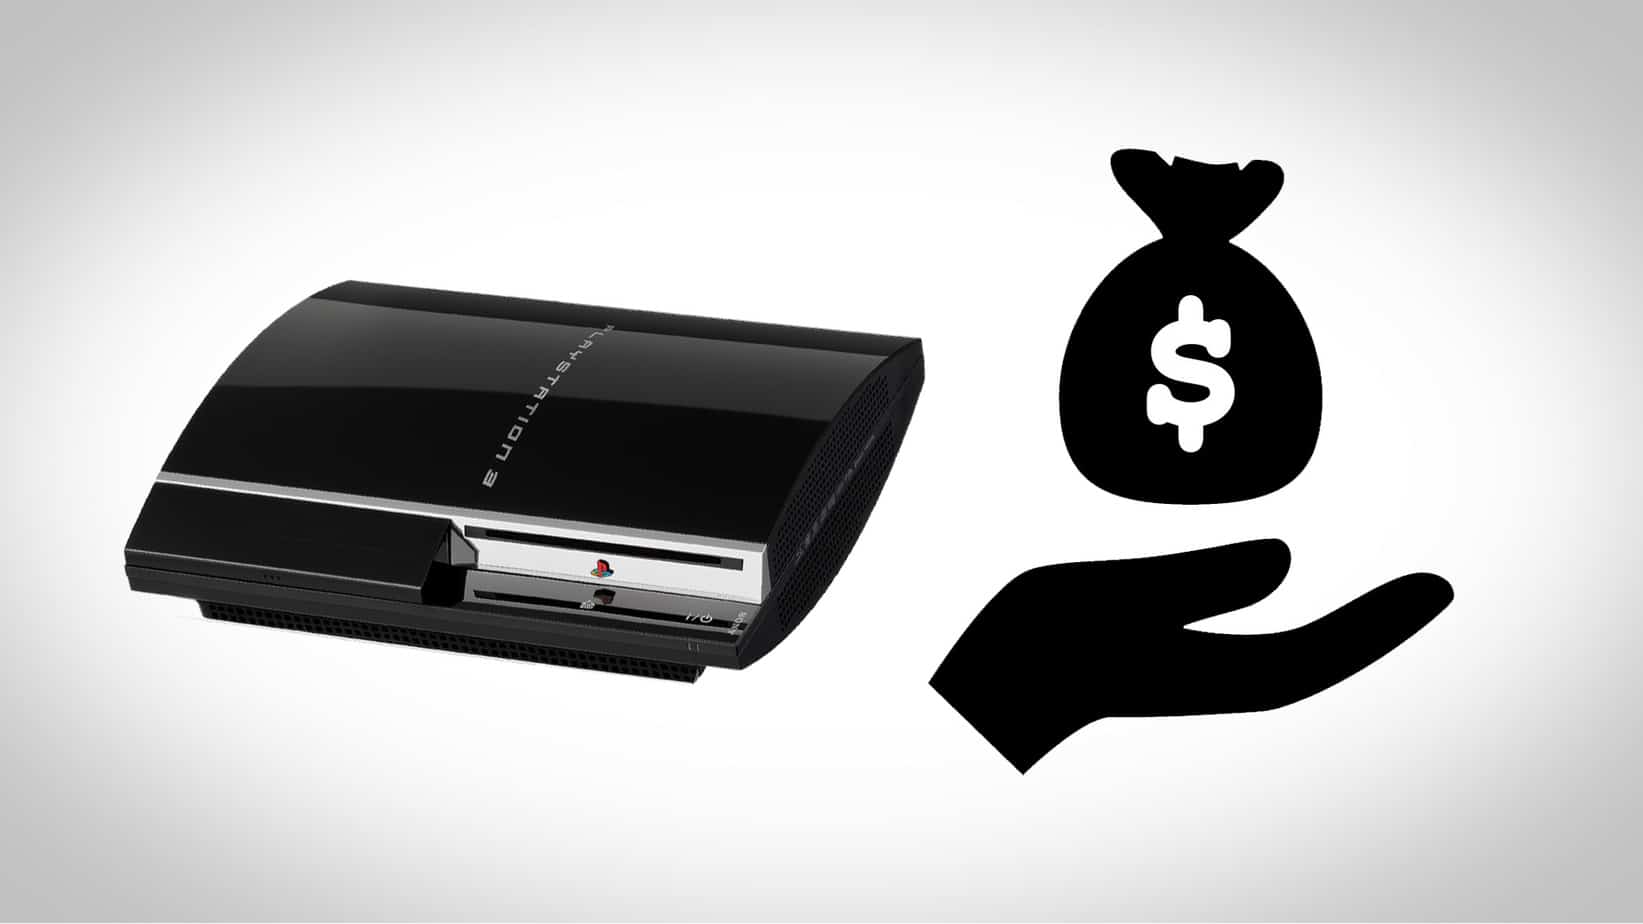 How Much Is A PS3 Worth Today?